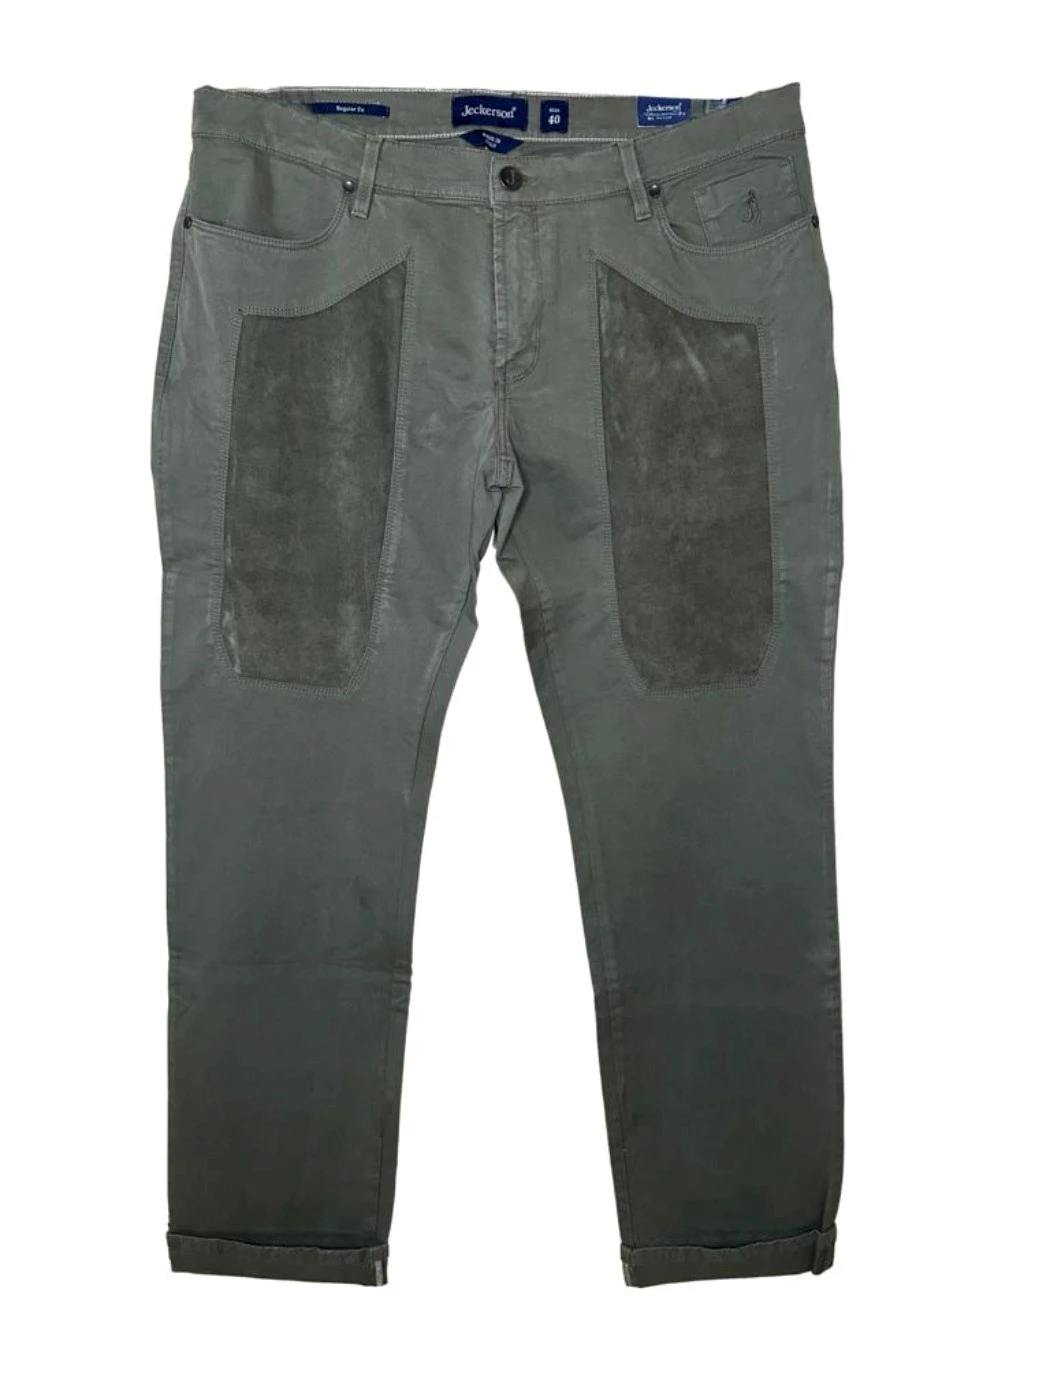 Trousers with Jeckerson Alcantara patch